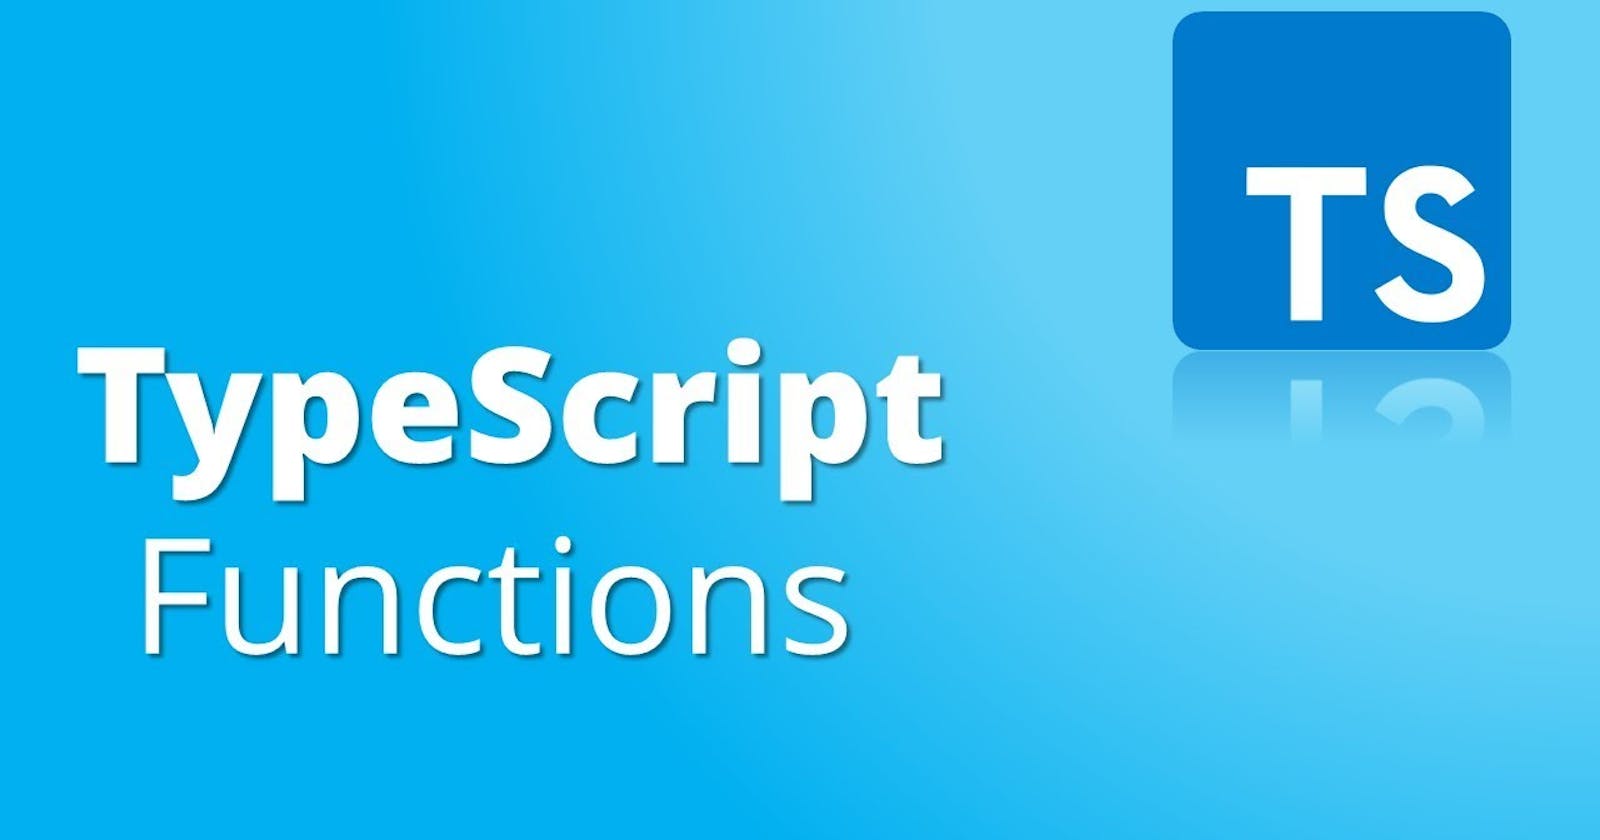 How to Type the Function in Typescript. Not Typing✍️, but Type😆